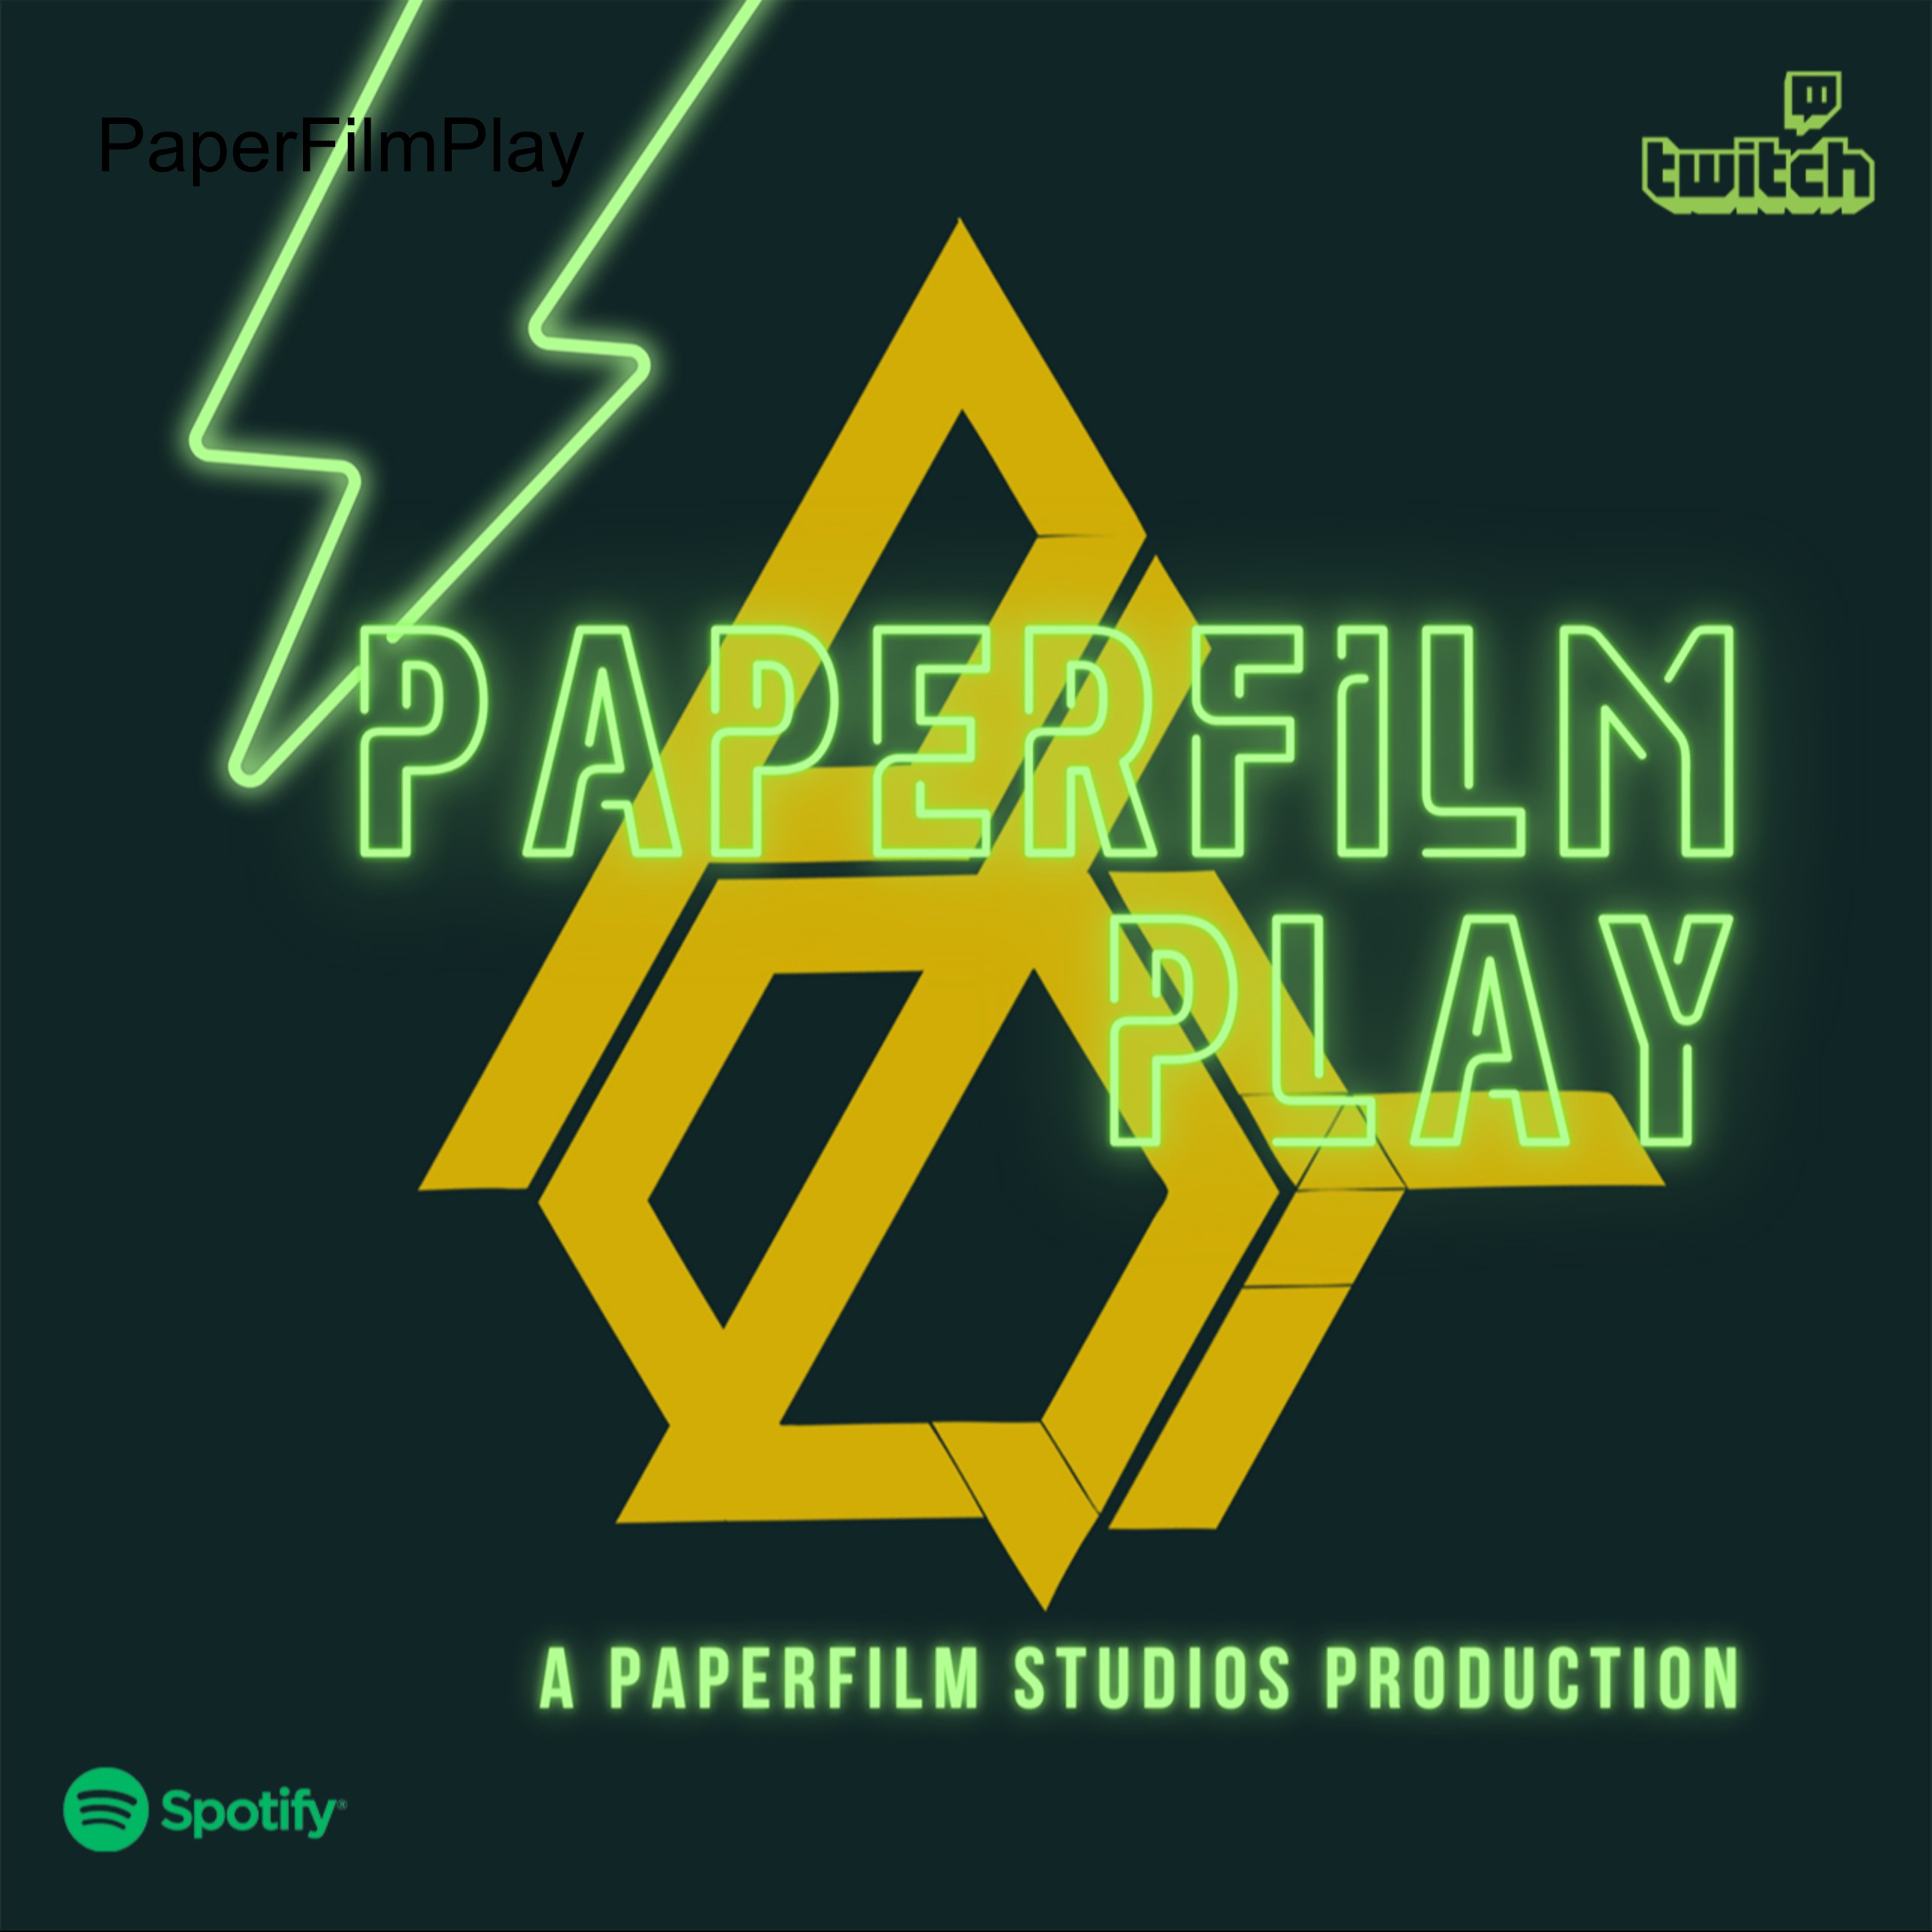 PaperFilmPlay